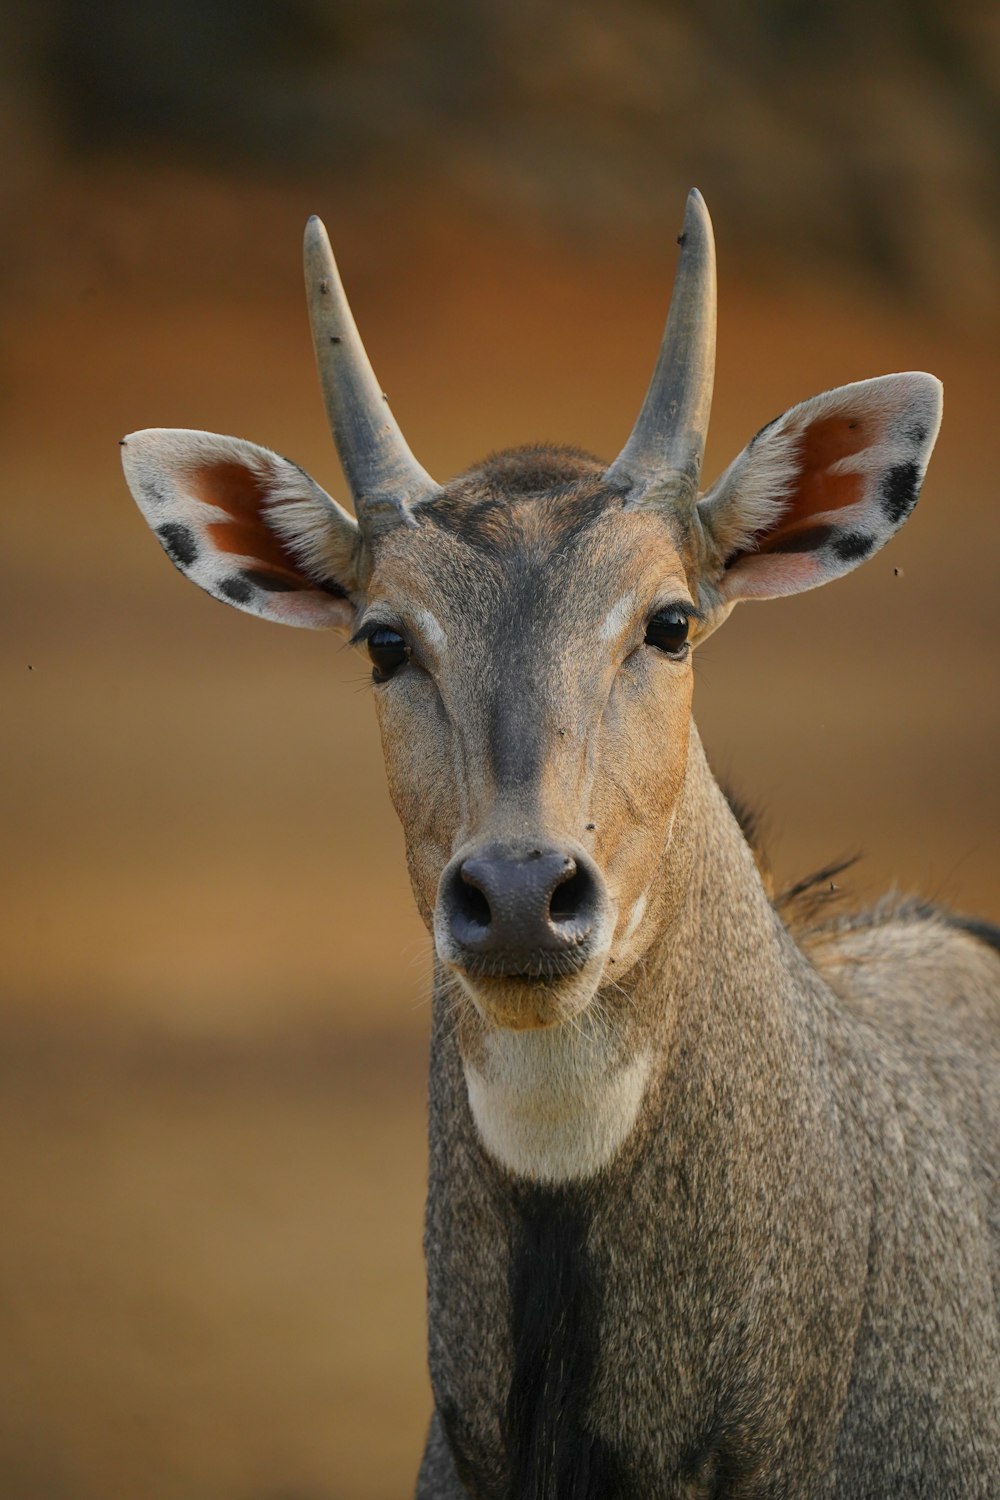 a close up of a deer's face with a blurry background